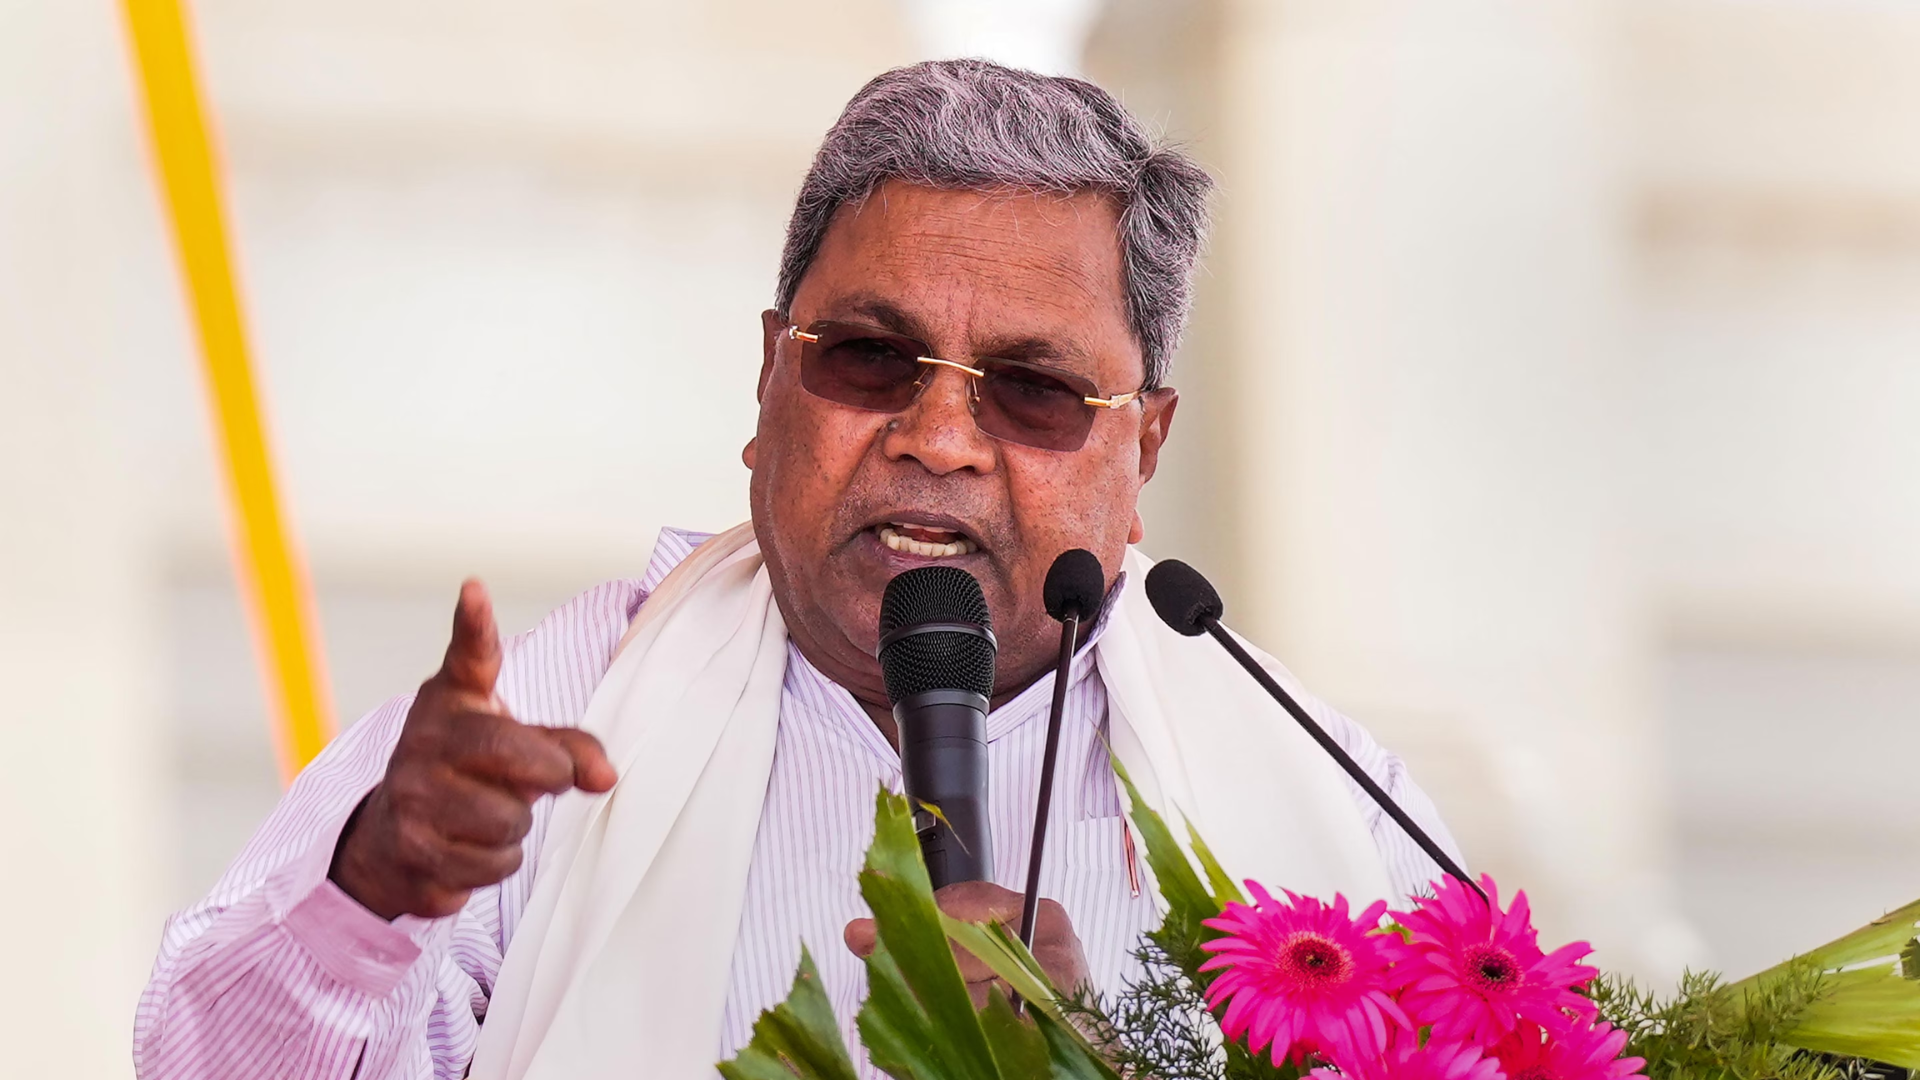 K’taka CM Siddaramaiah Announces 600 Indira Canteen Will Come Up Across State